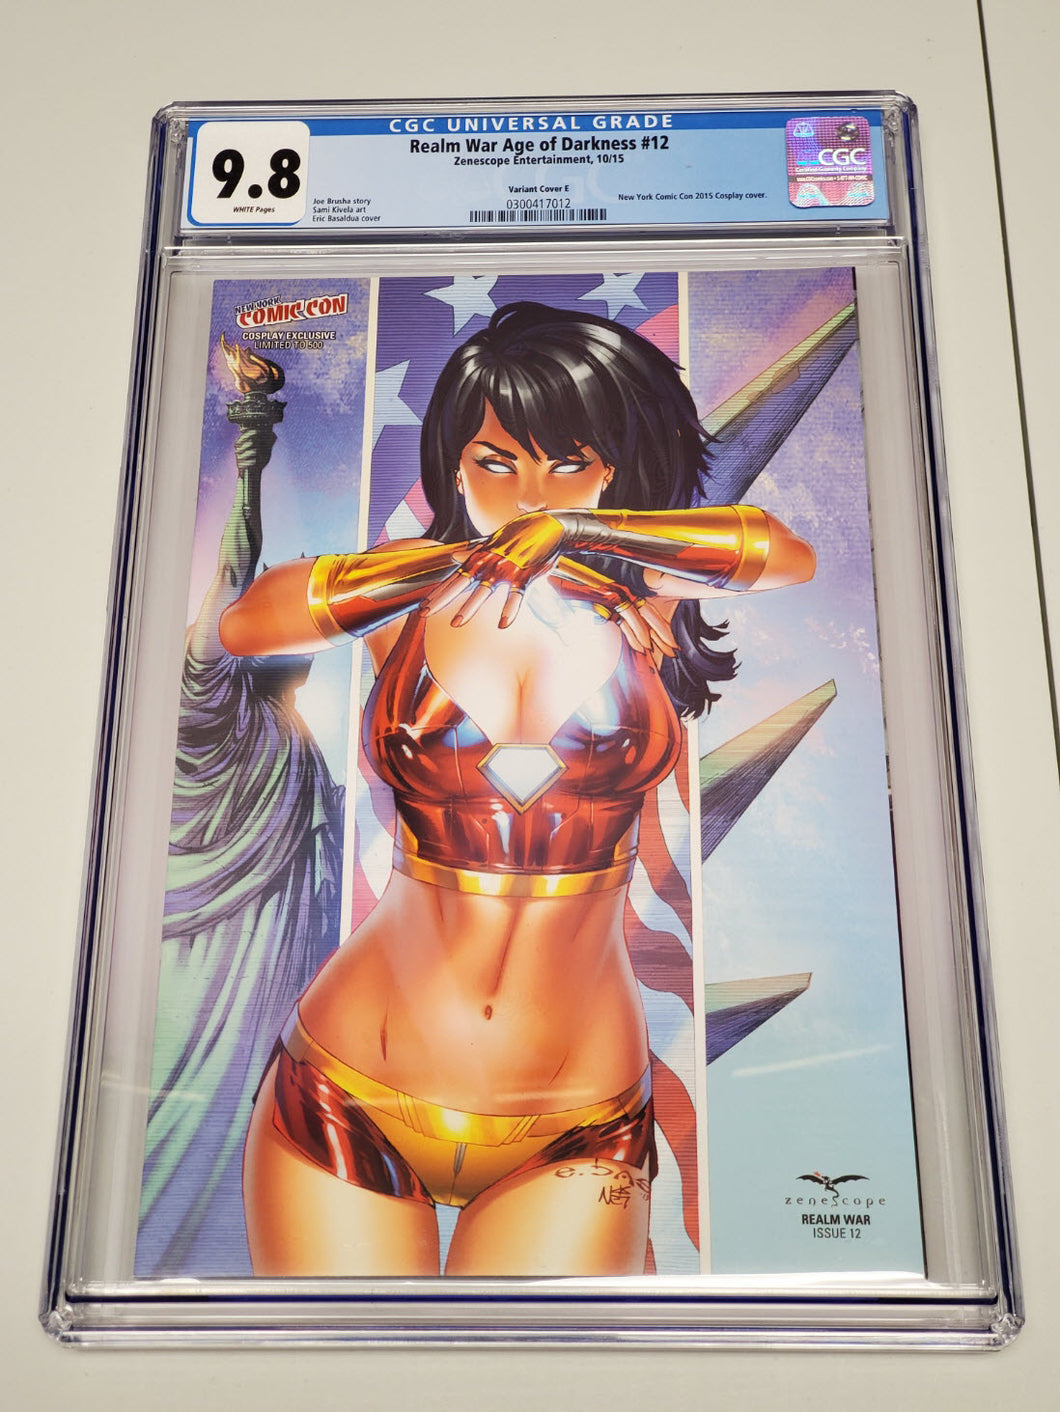 Zenescope Realm War Age of Darkness #12 - CGC 9.8 - 2015 NYCC Cosplay Cover